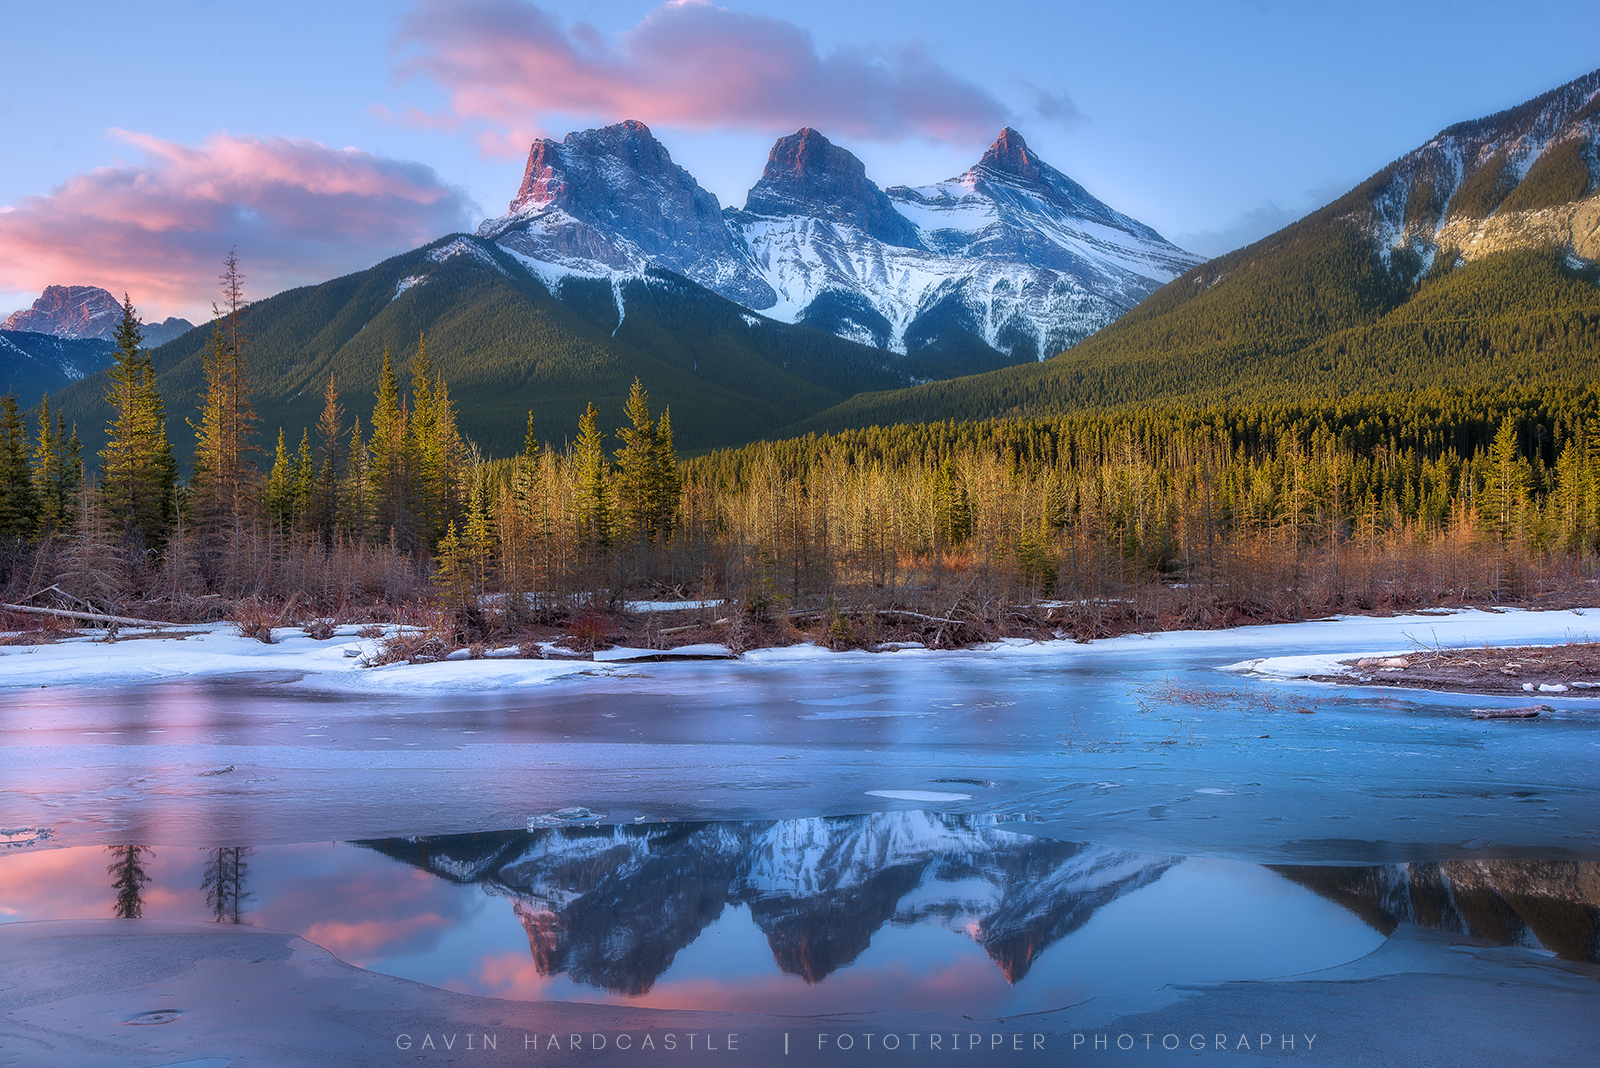 Photography Workshops in Banff During Winter